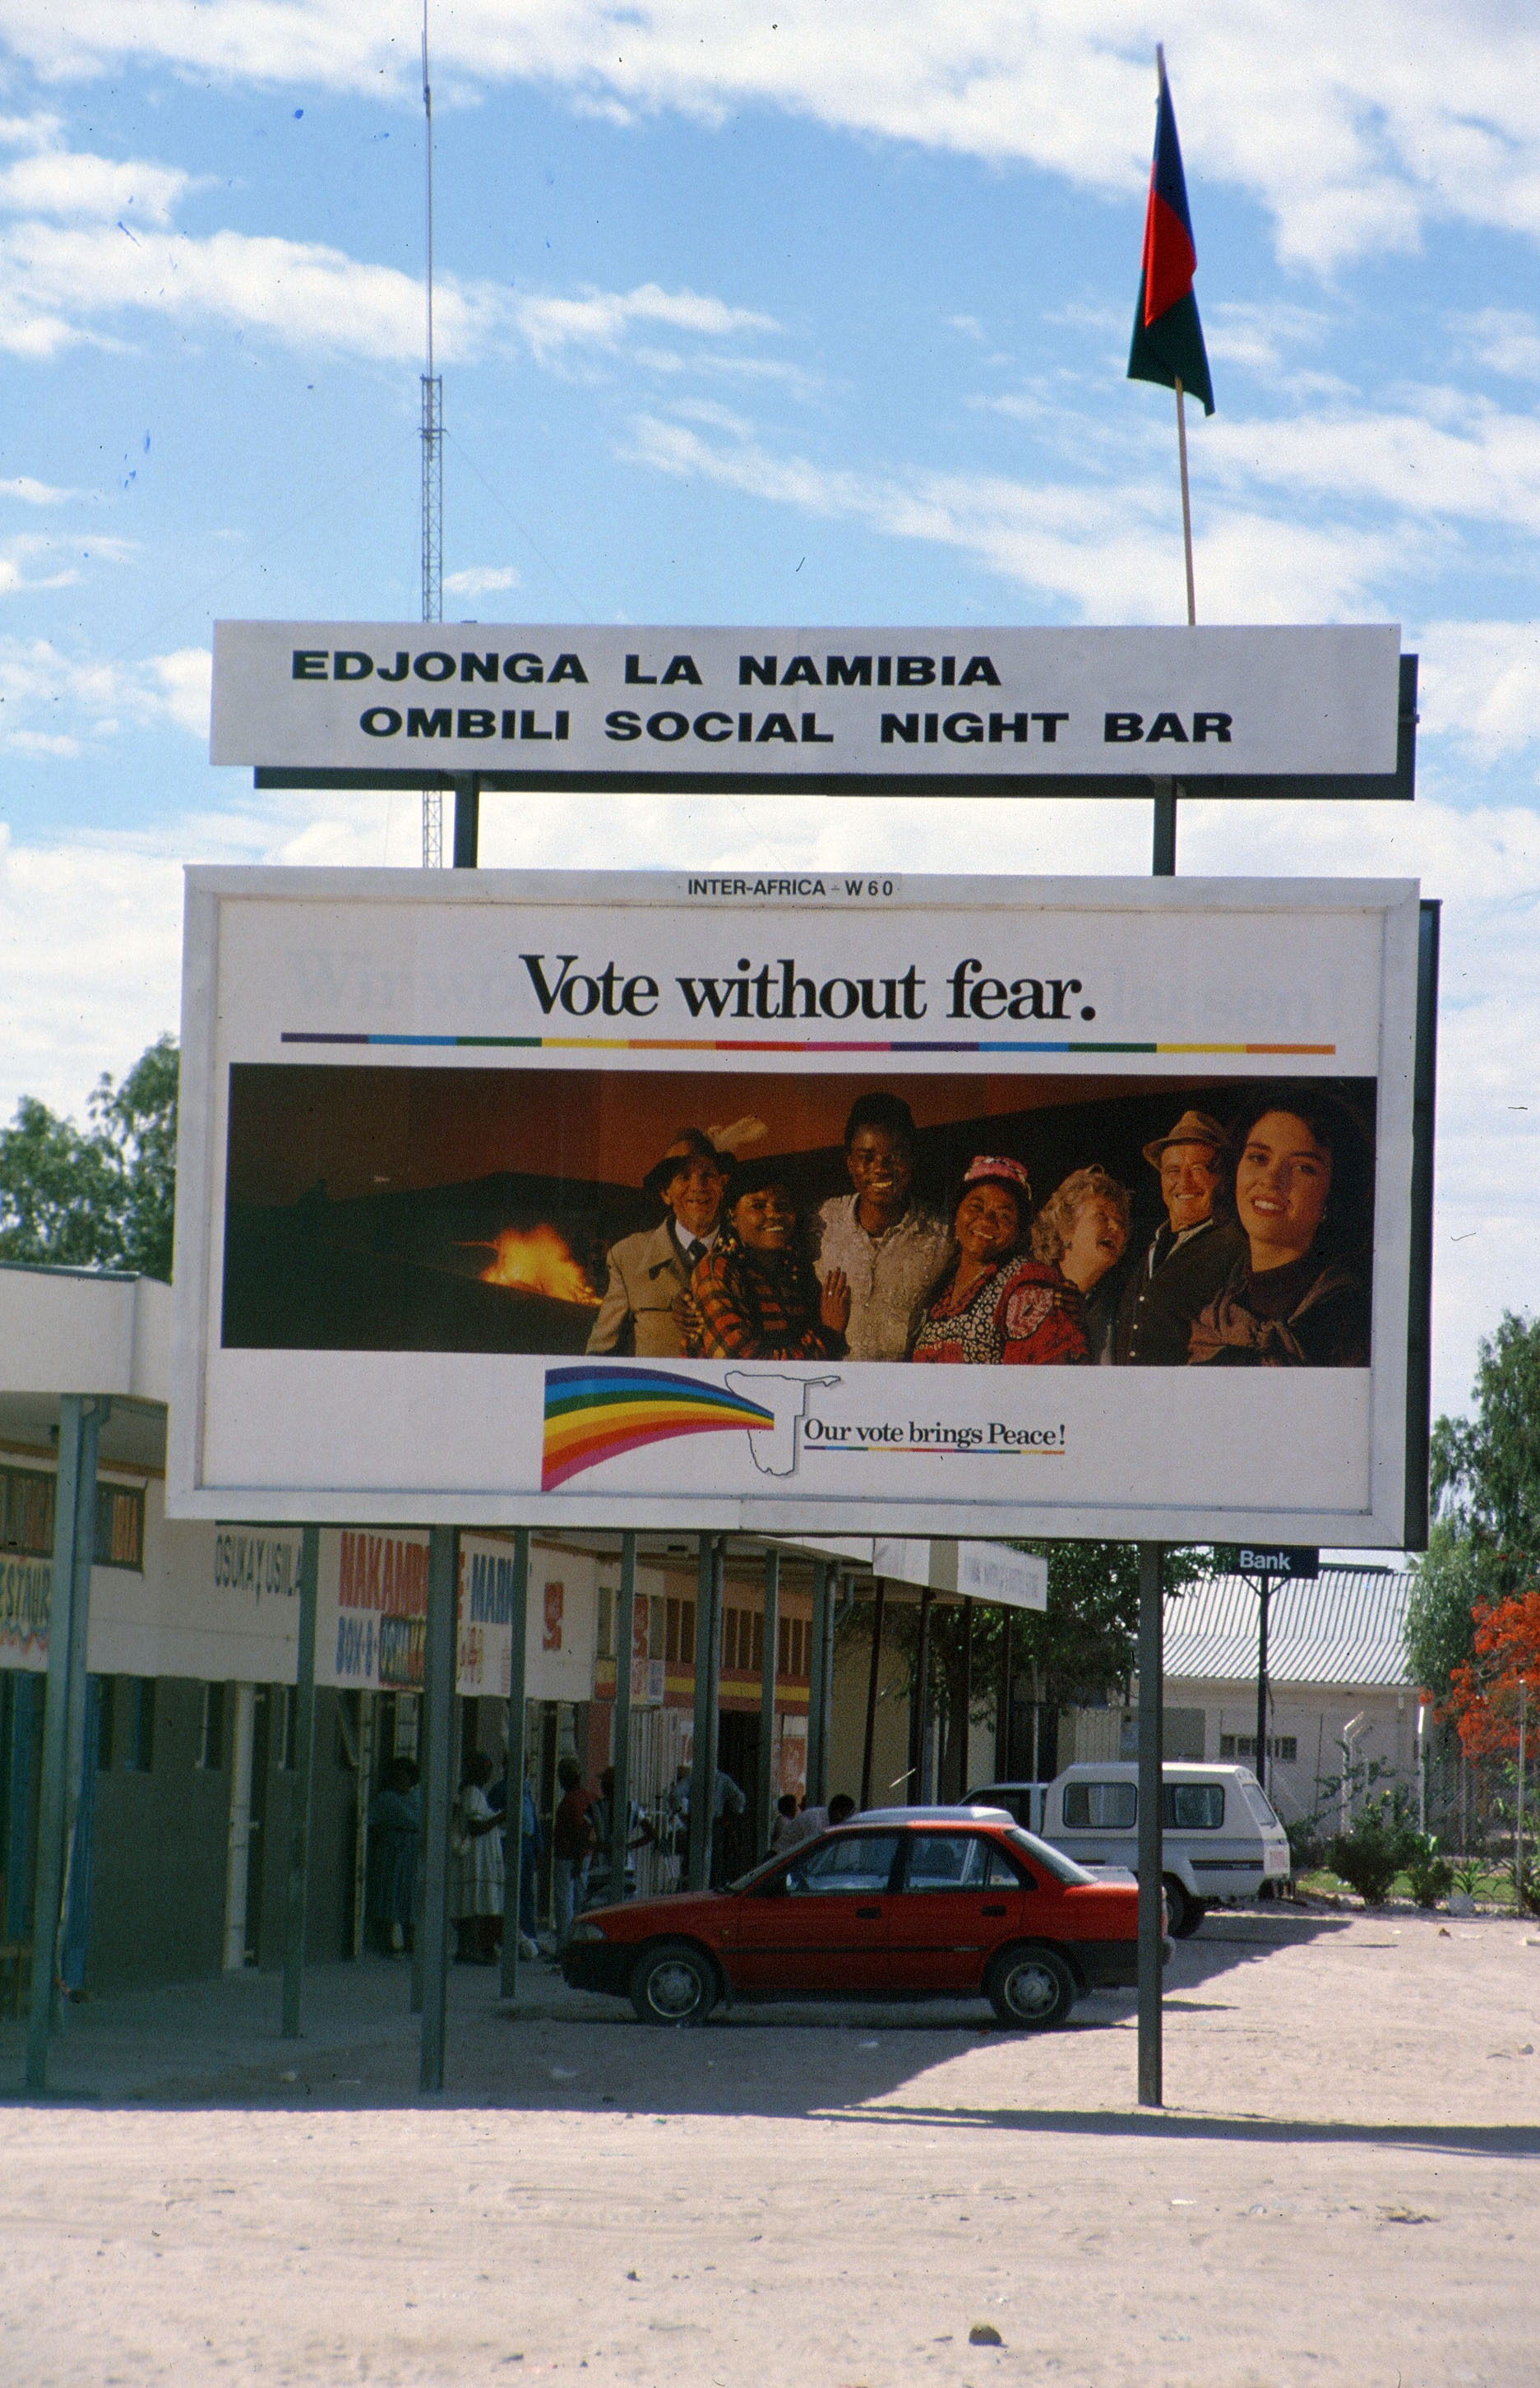 Billboard from UNTAG voter education campaign